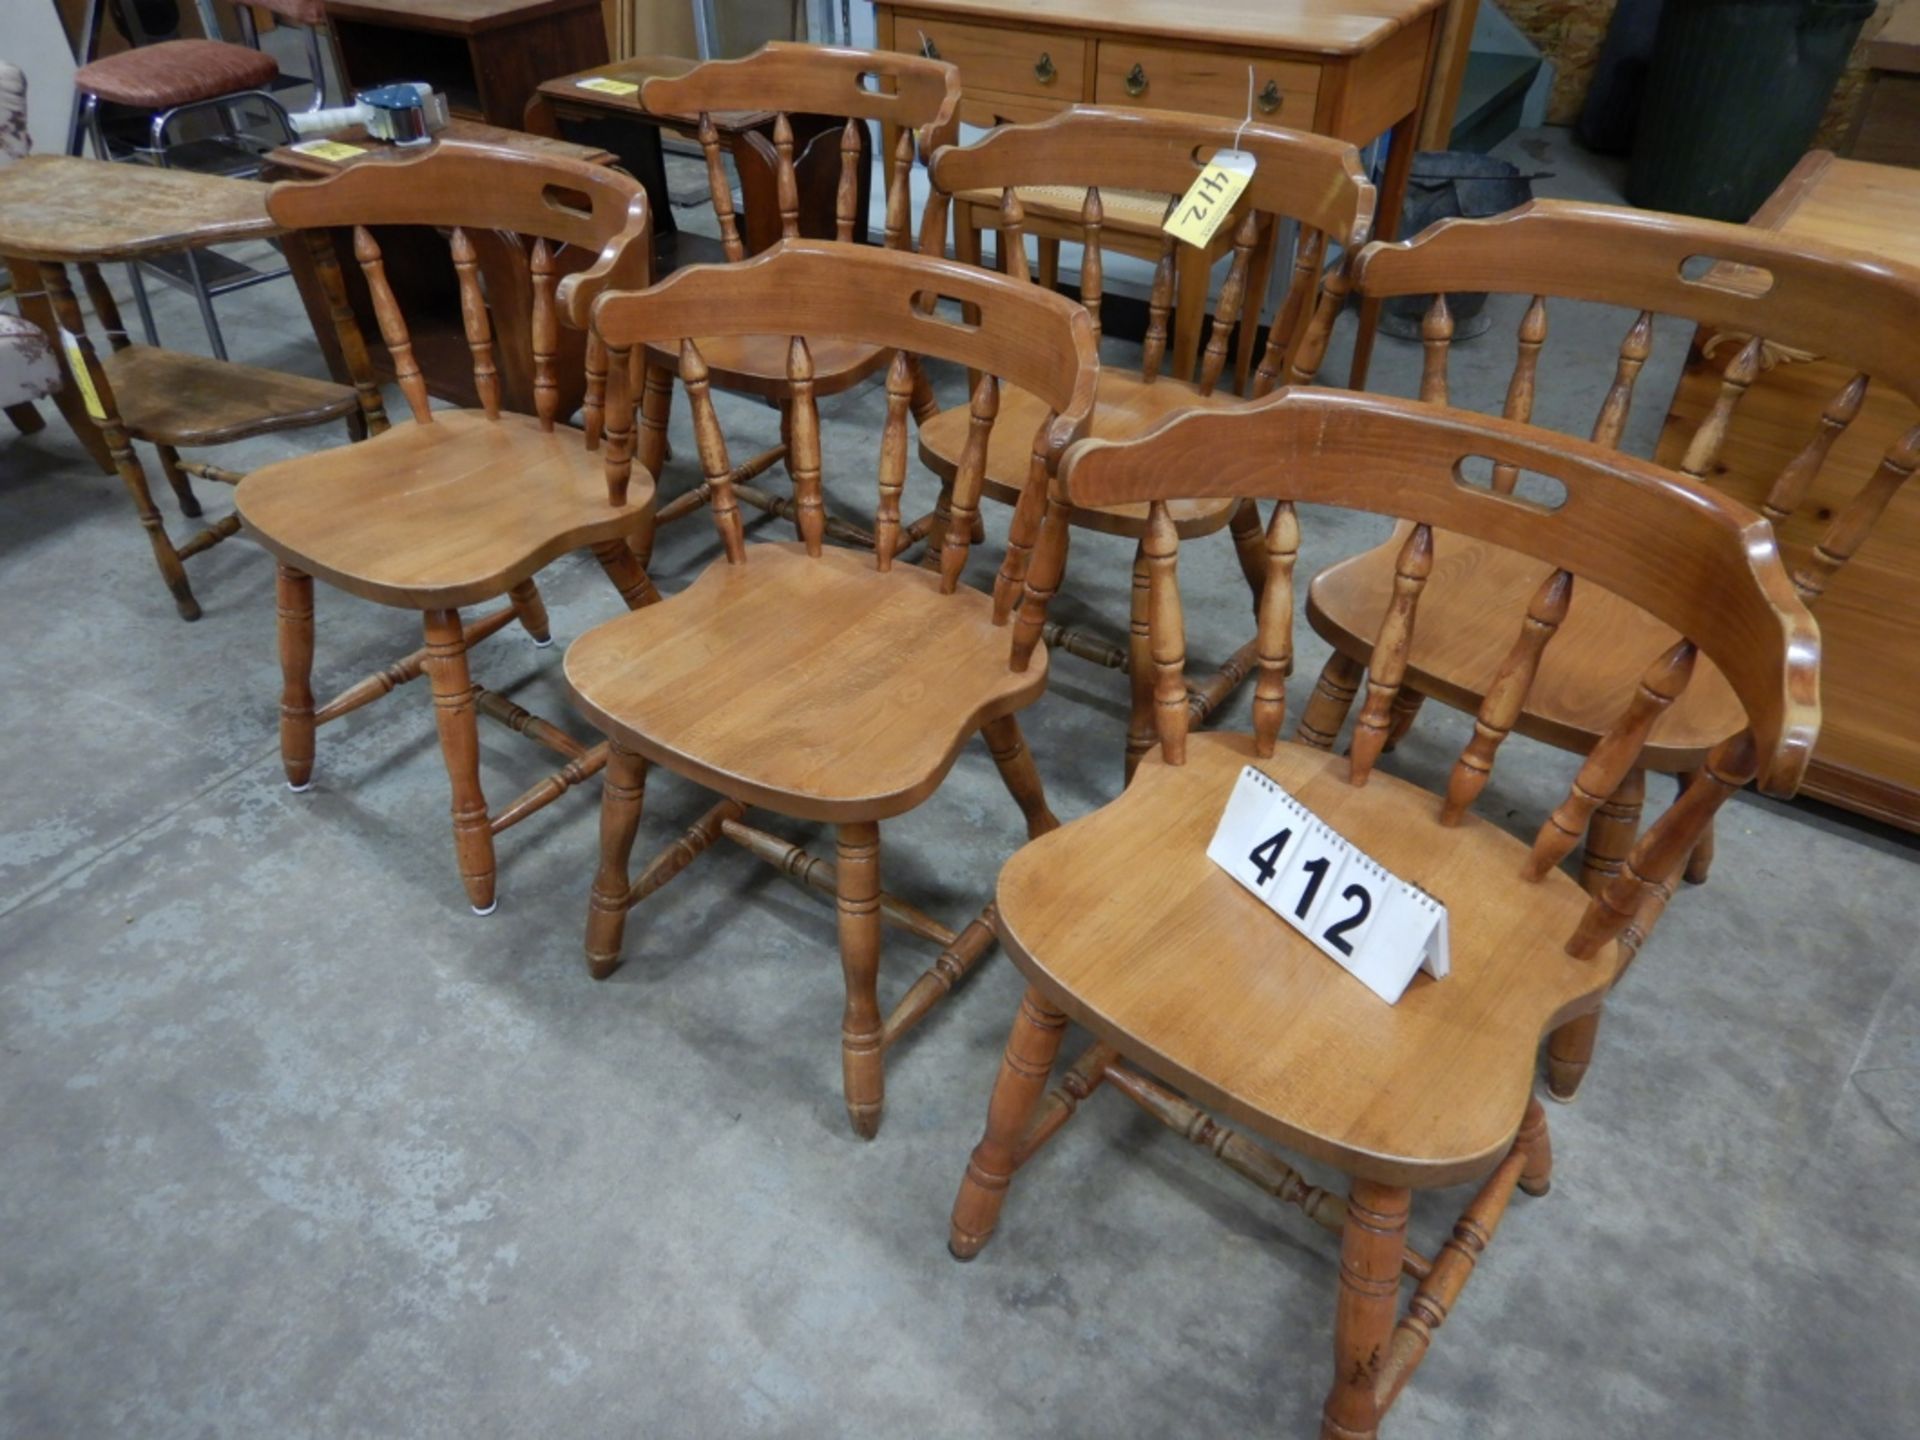 SET OF 6-WOOD CAPTIONS CHAIRS